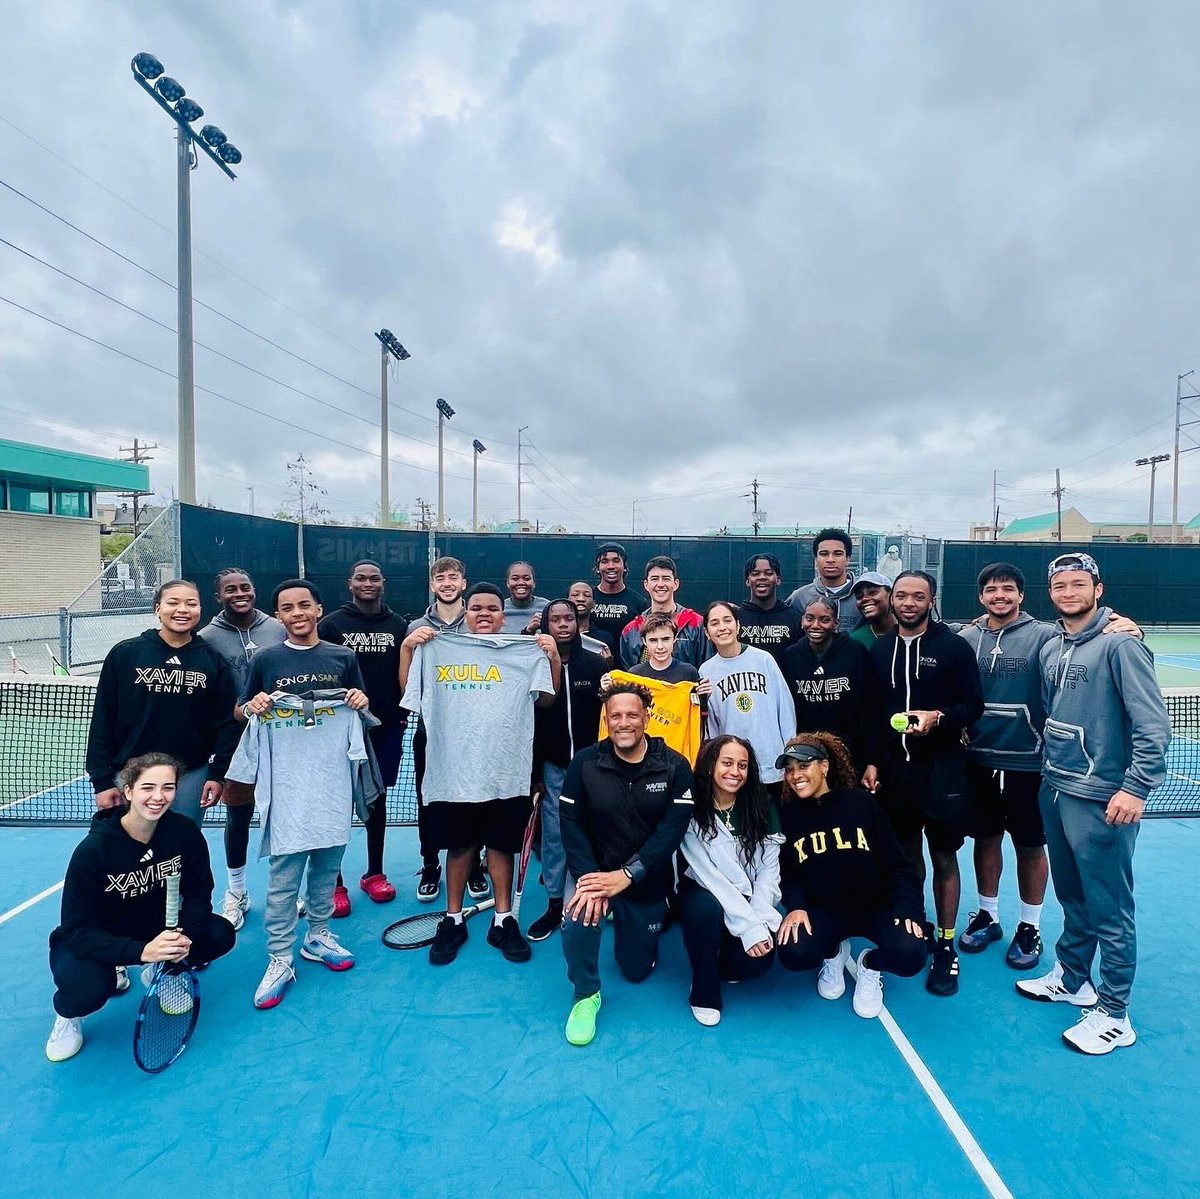 🎾 A Saturday well spent with the @XULA1925 tennis team! Our mentees recently had the amazing opportunity to interact with these collegiate student-athletes, learn the fundamentals of the game, and get some quality time together on a weekend. Thanks y’all.